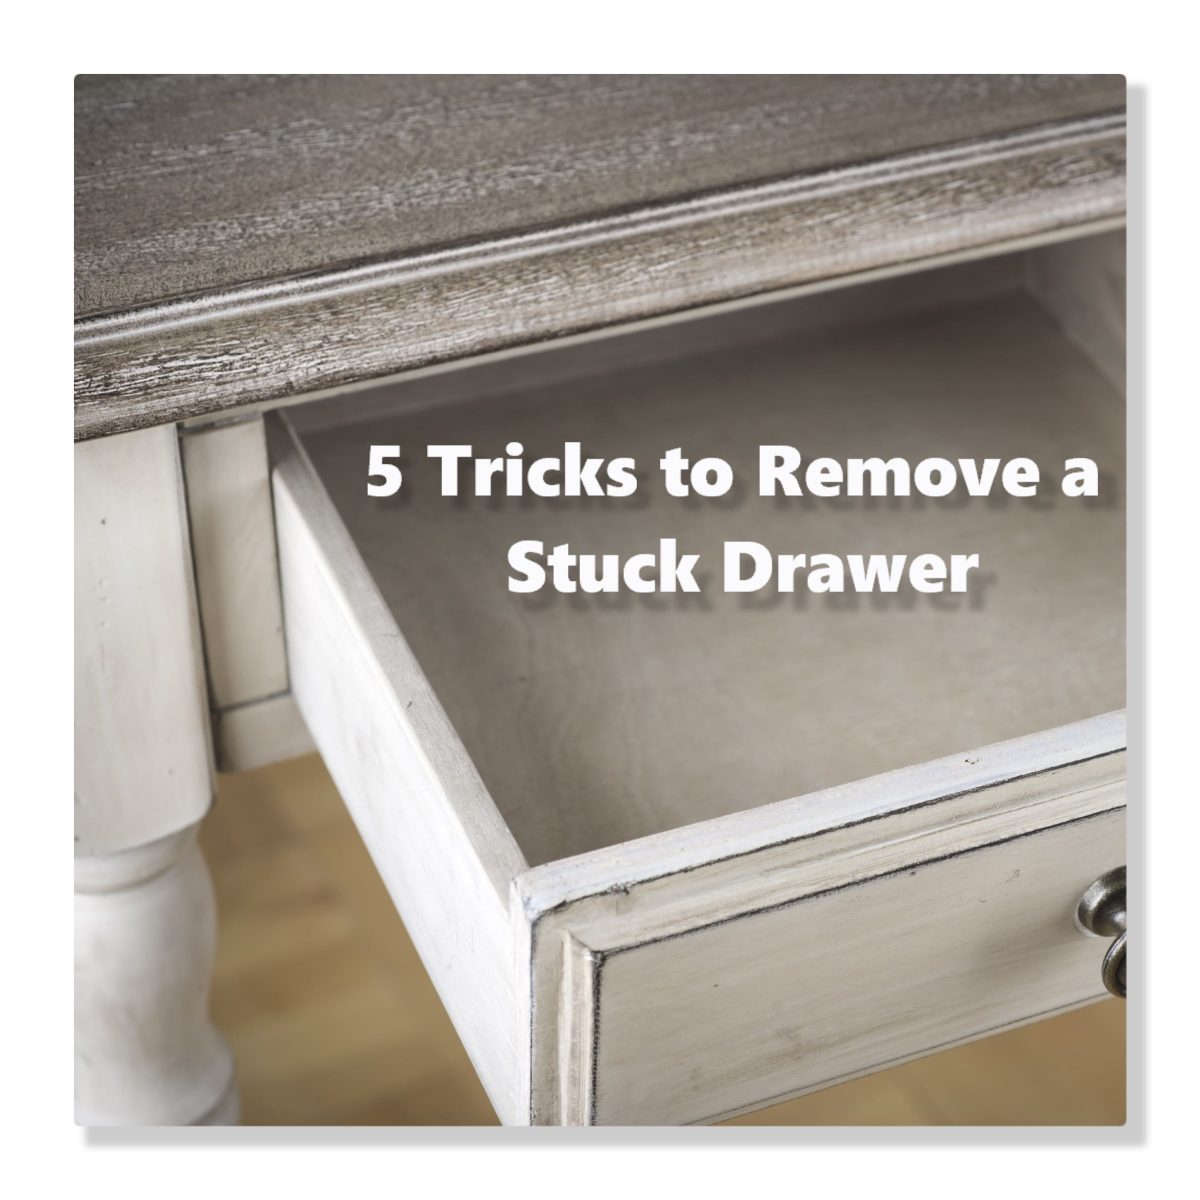 How to Fix Old Dresser Drawers that Stick